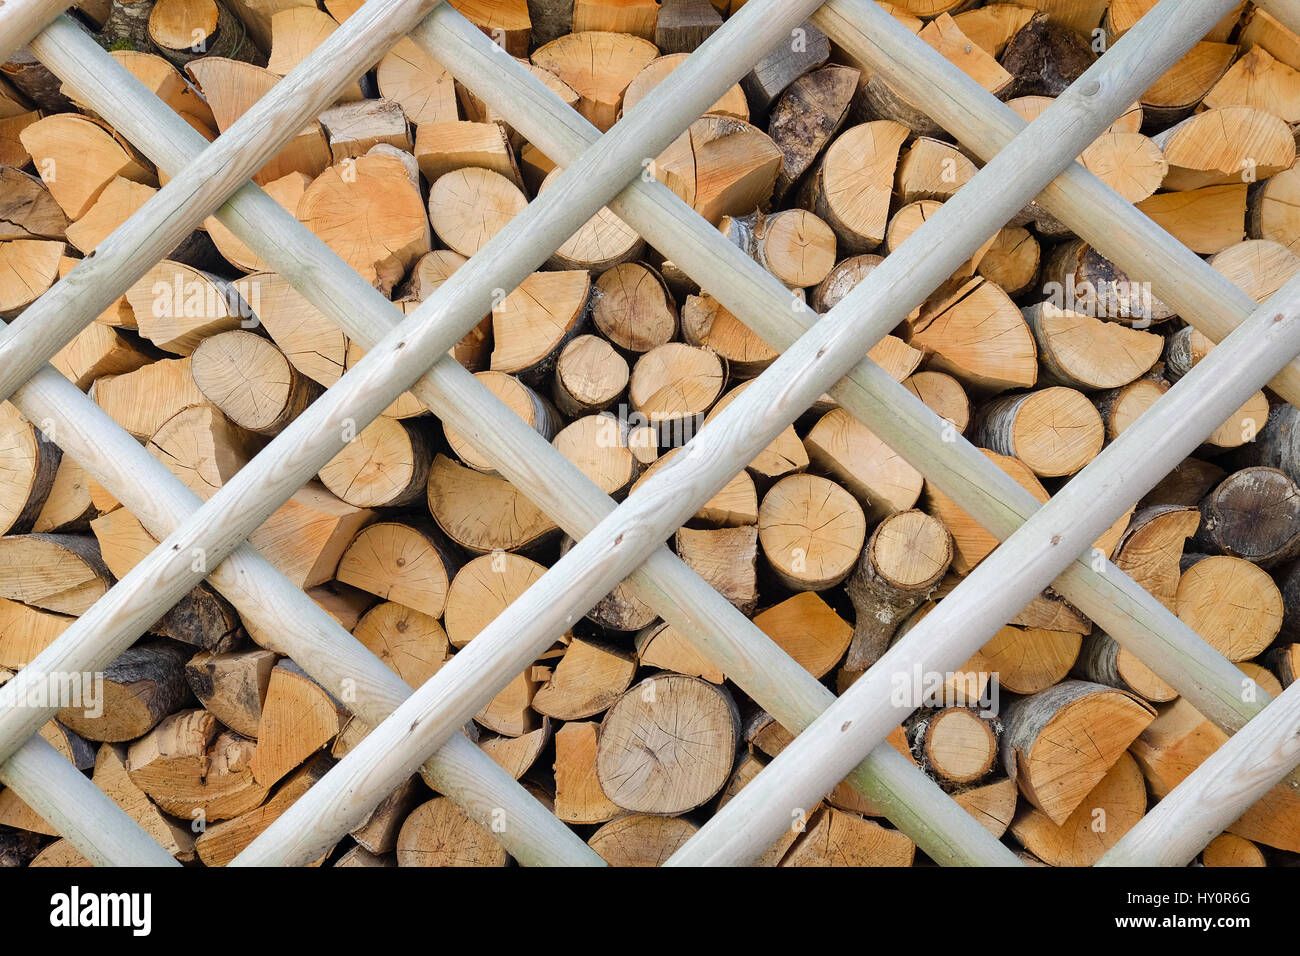 background of a pile of firewood neatly stacked behind a wooden fence Stock Photo